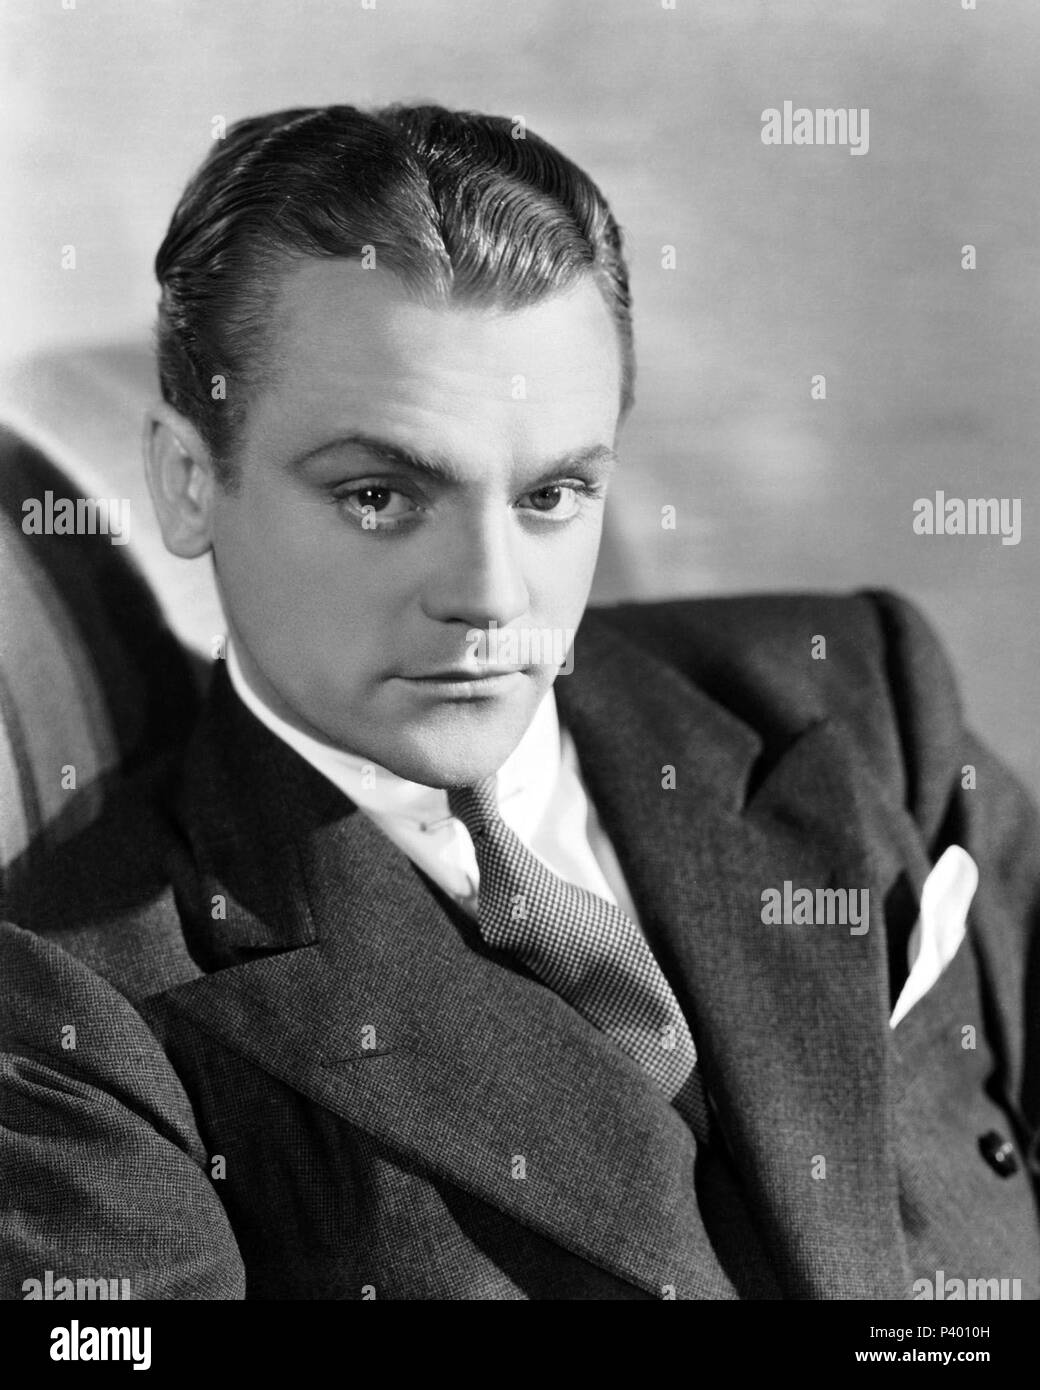 James Cagney Ref Photo IN Each Paddle I Die CAG270420151 Format 11x15 CM 